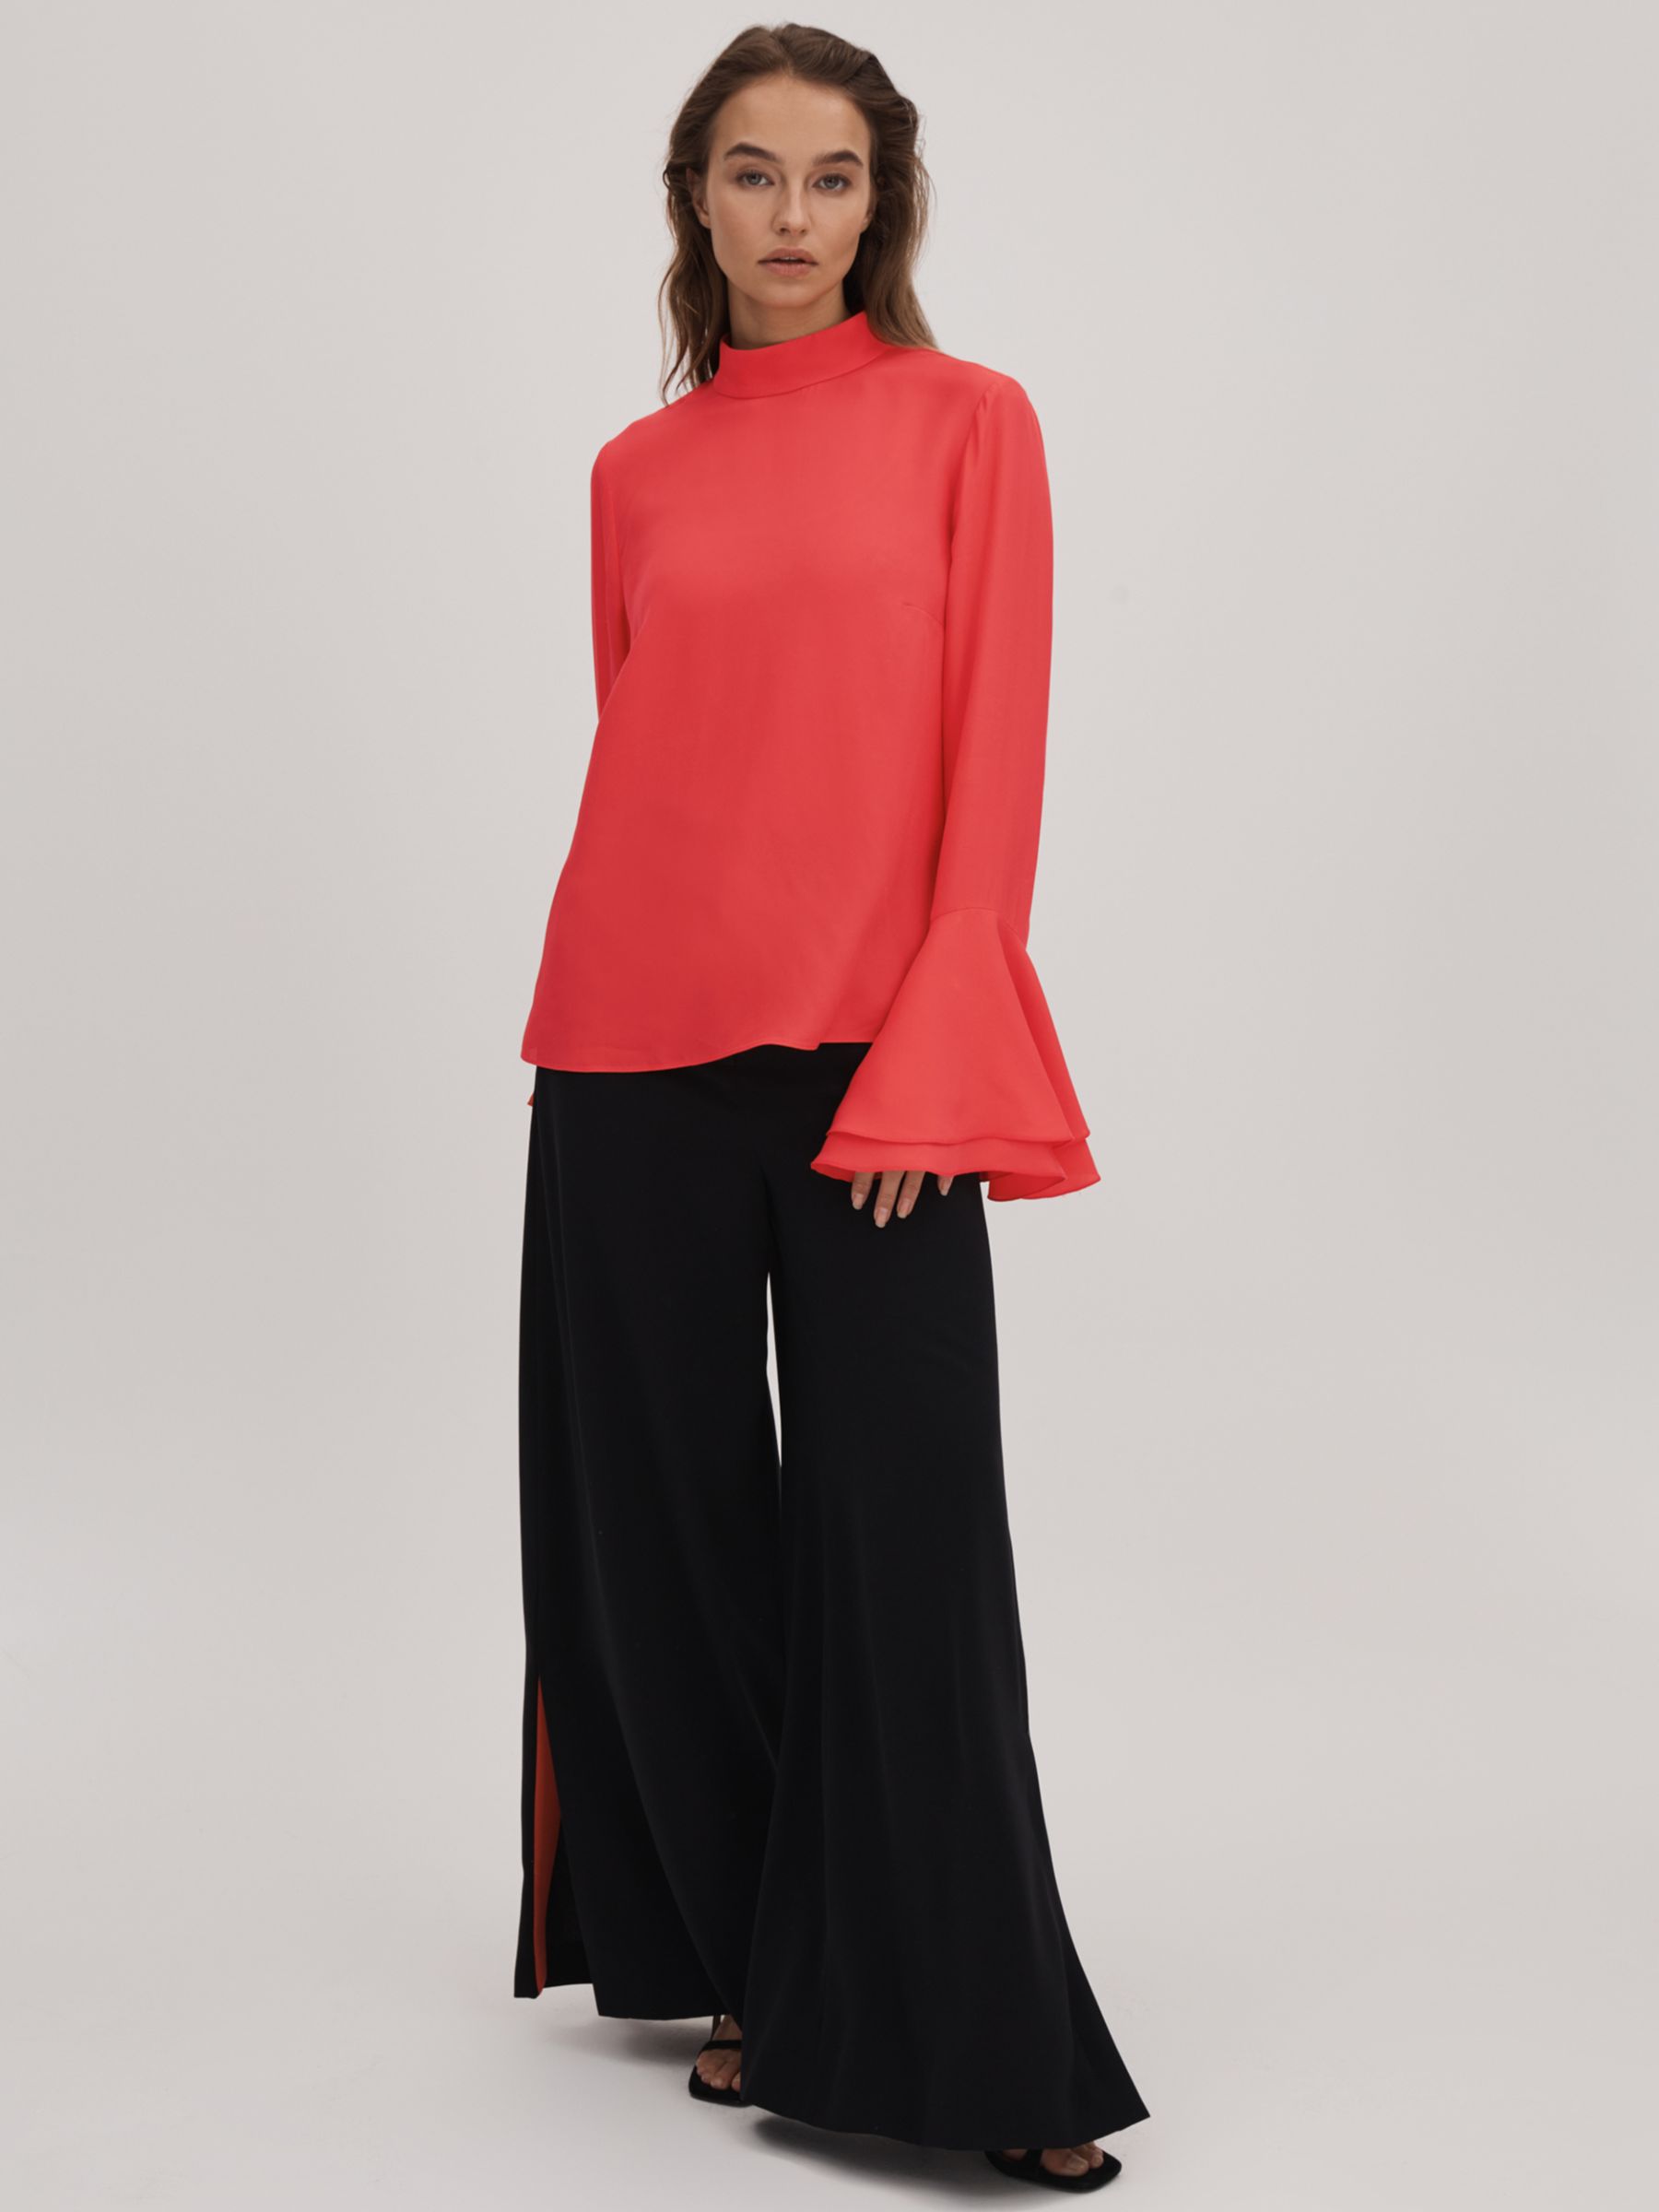 FLORERE High Neck Fluted Cuff Blouse, Deep Coral, 8